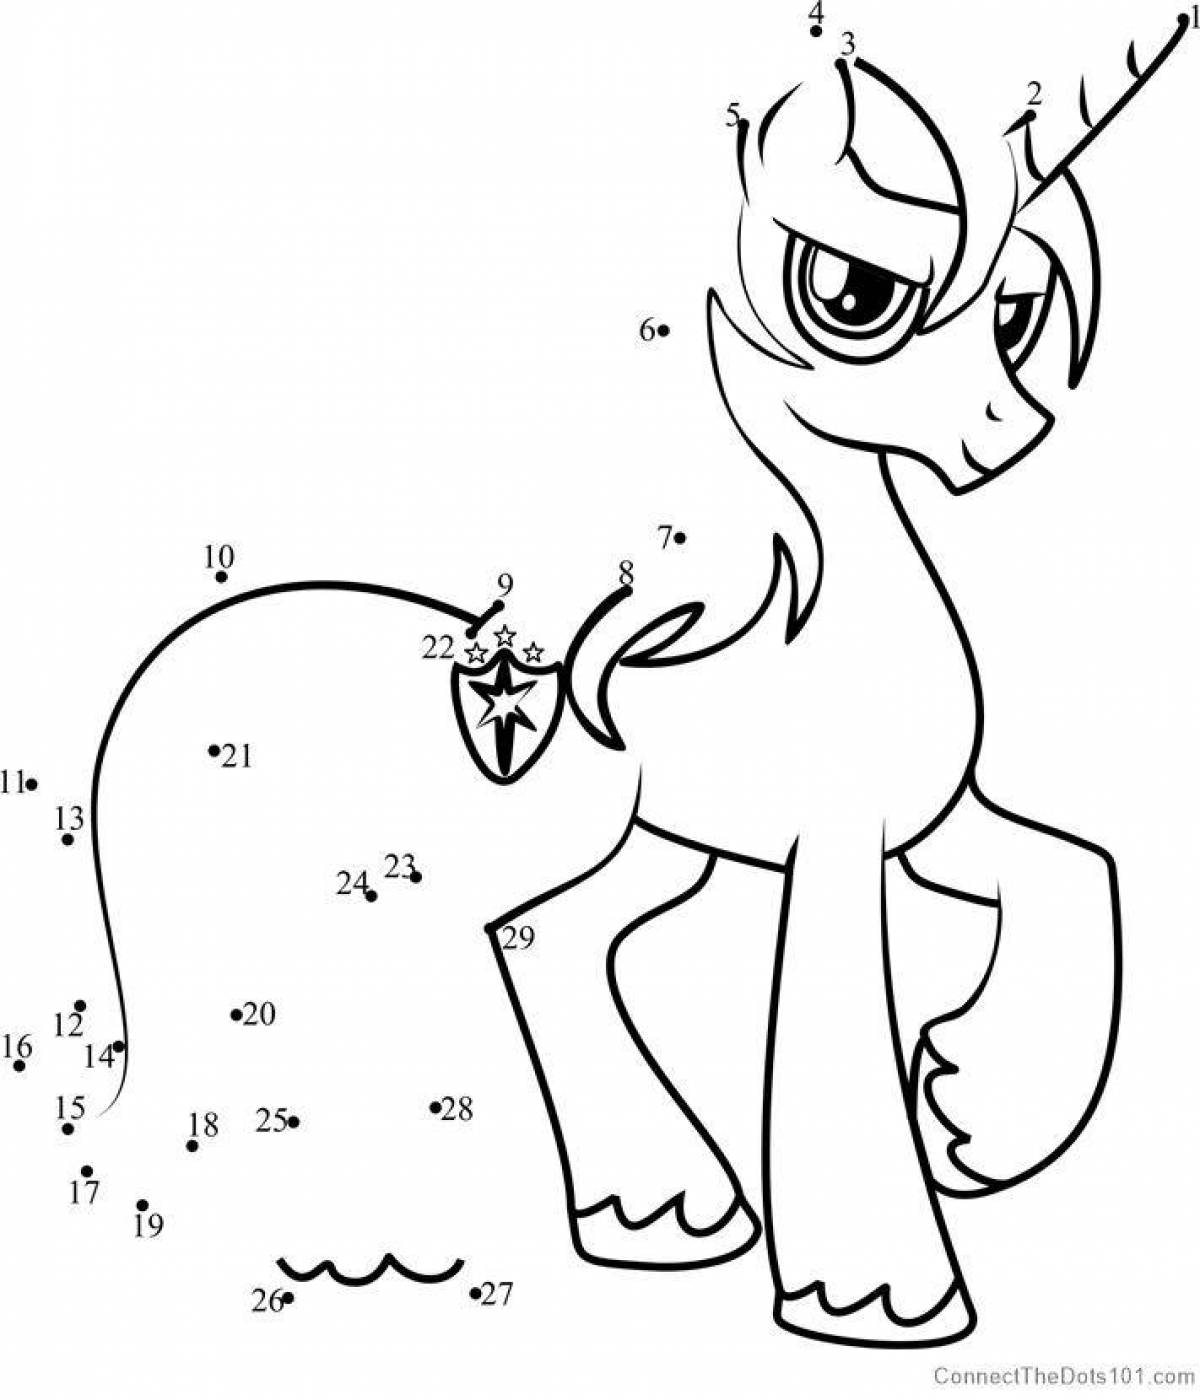 Amazing ponies by numbers coloring book